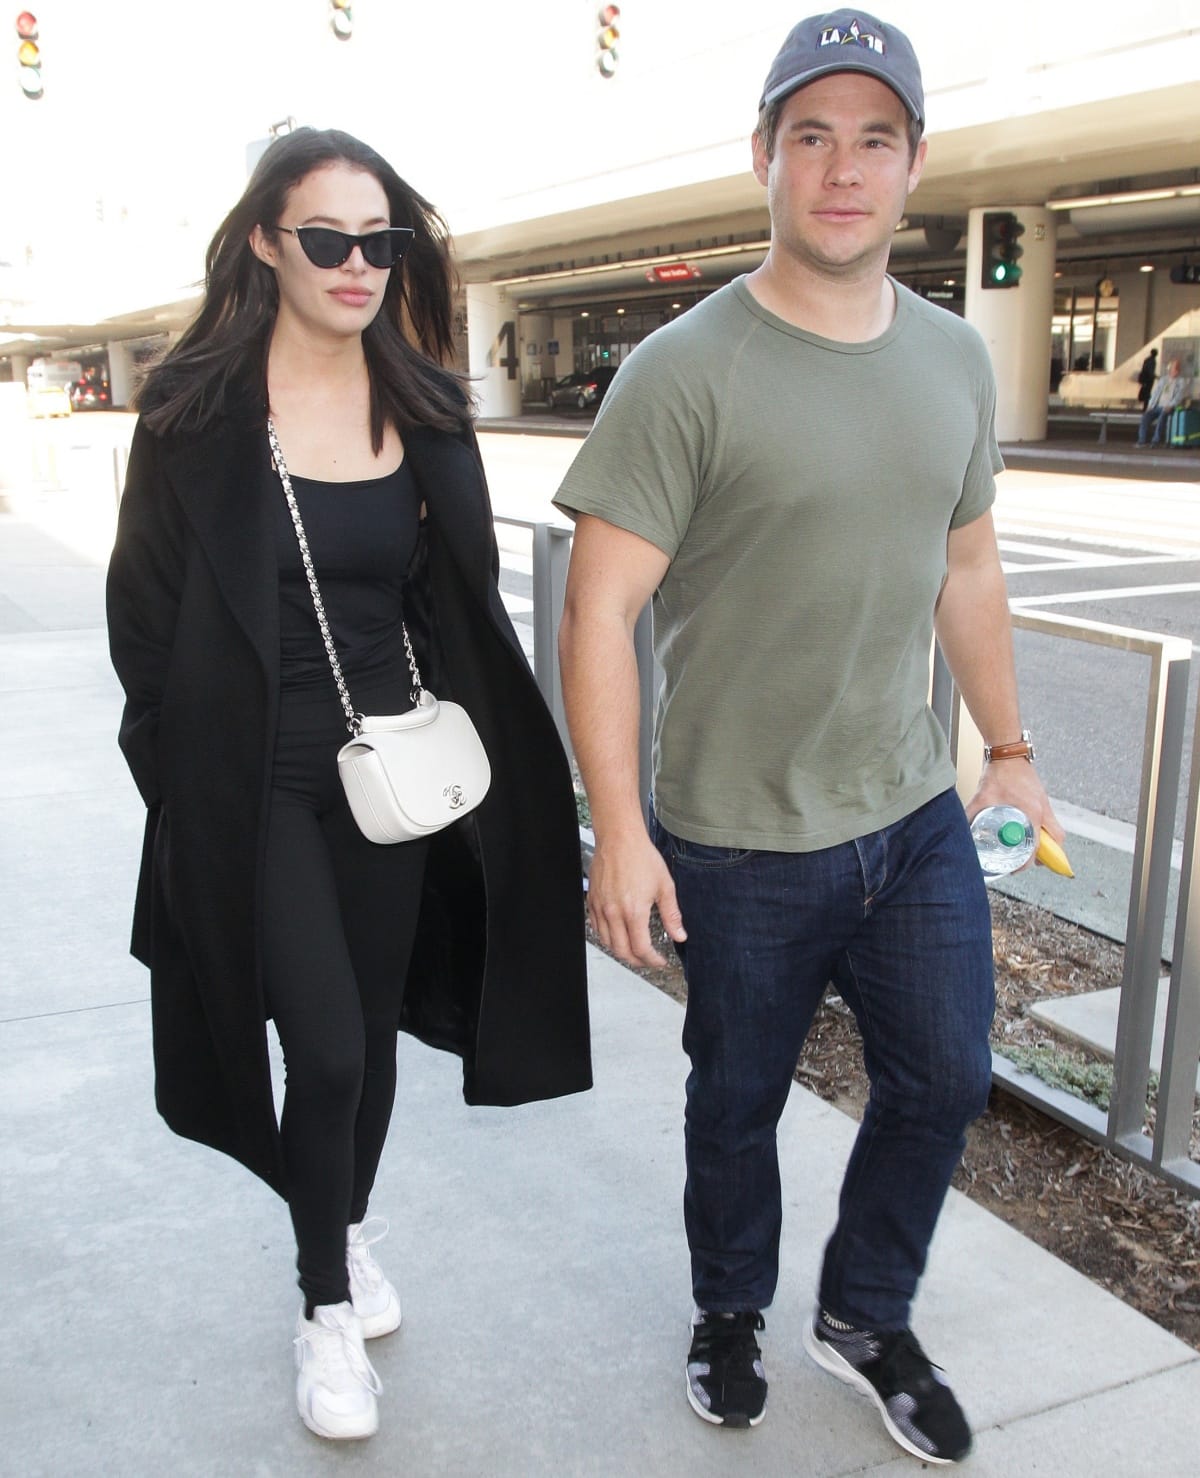 Chloe Bridges and Adam DeVine first crossed paths on a plane on the way to Louisiana to film a movie together entitled The Final Girls